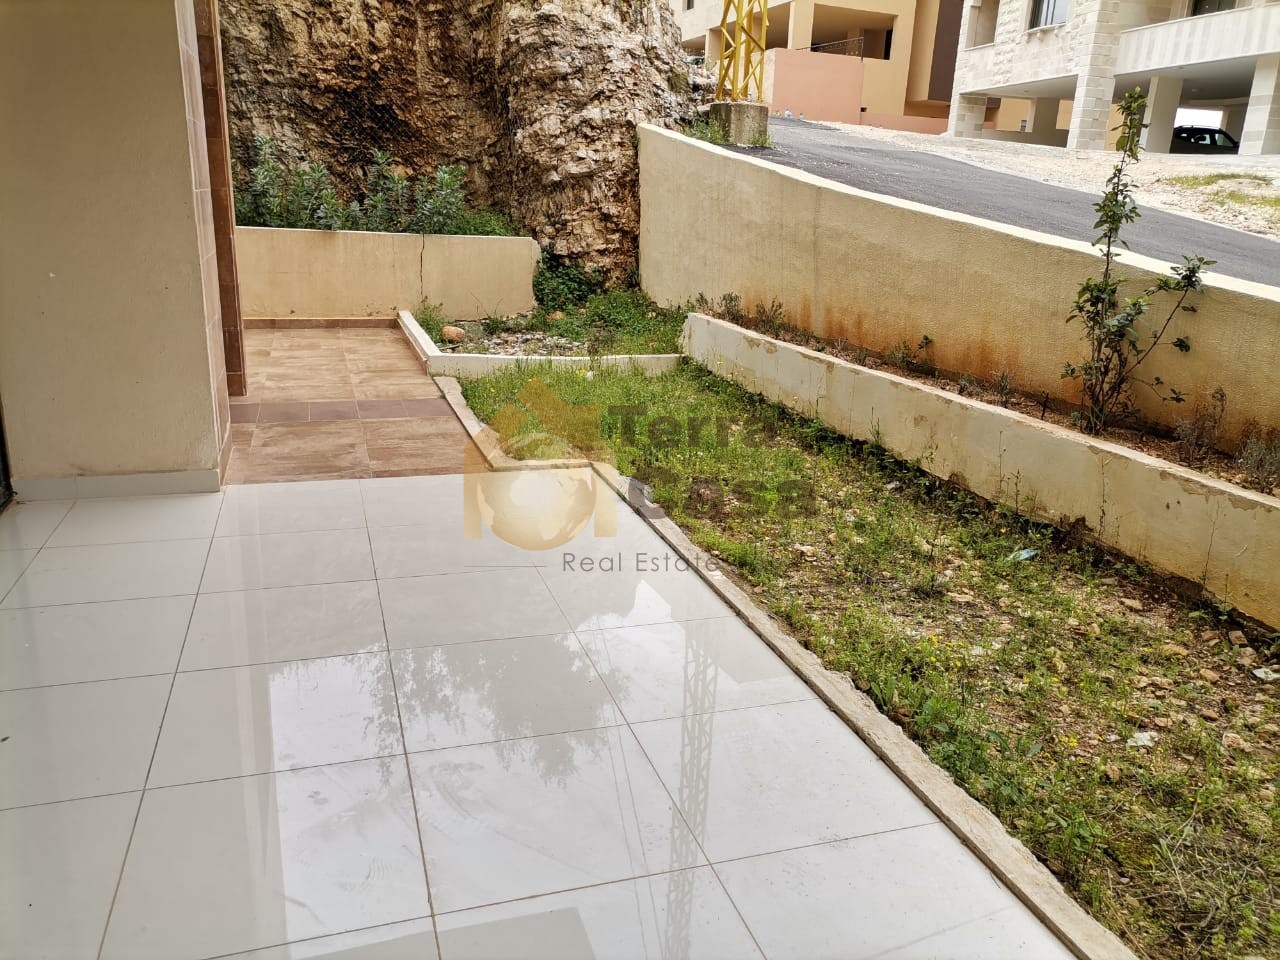 hboub brand new apartment with 60 sqm terrace and garden Ref#3383